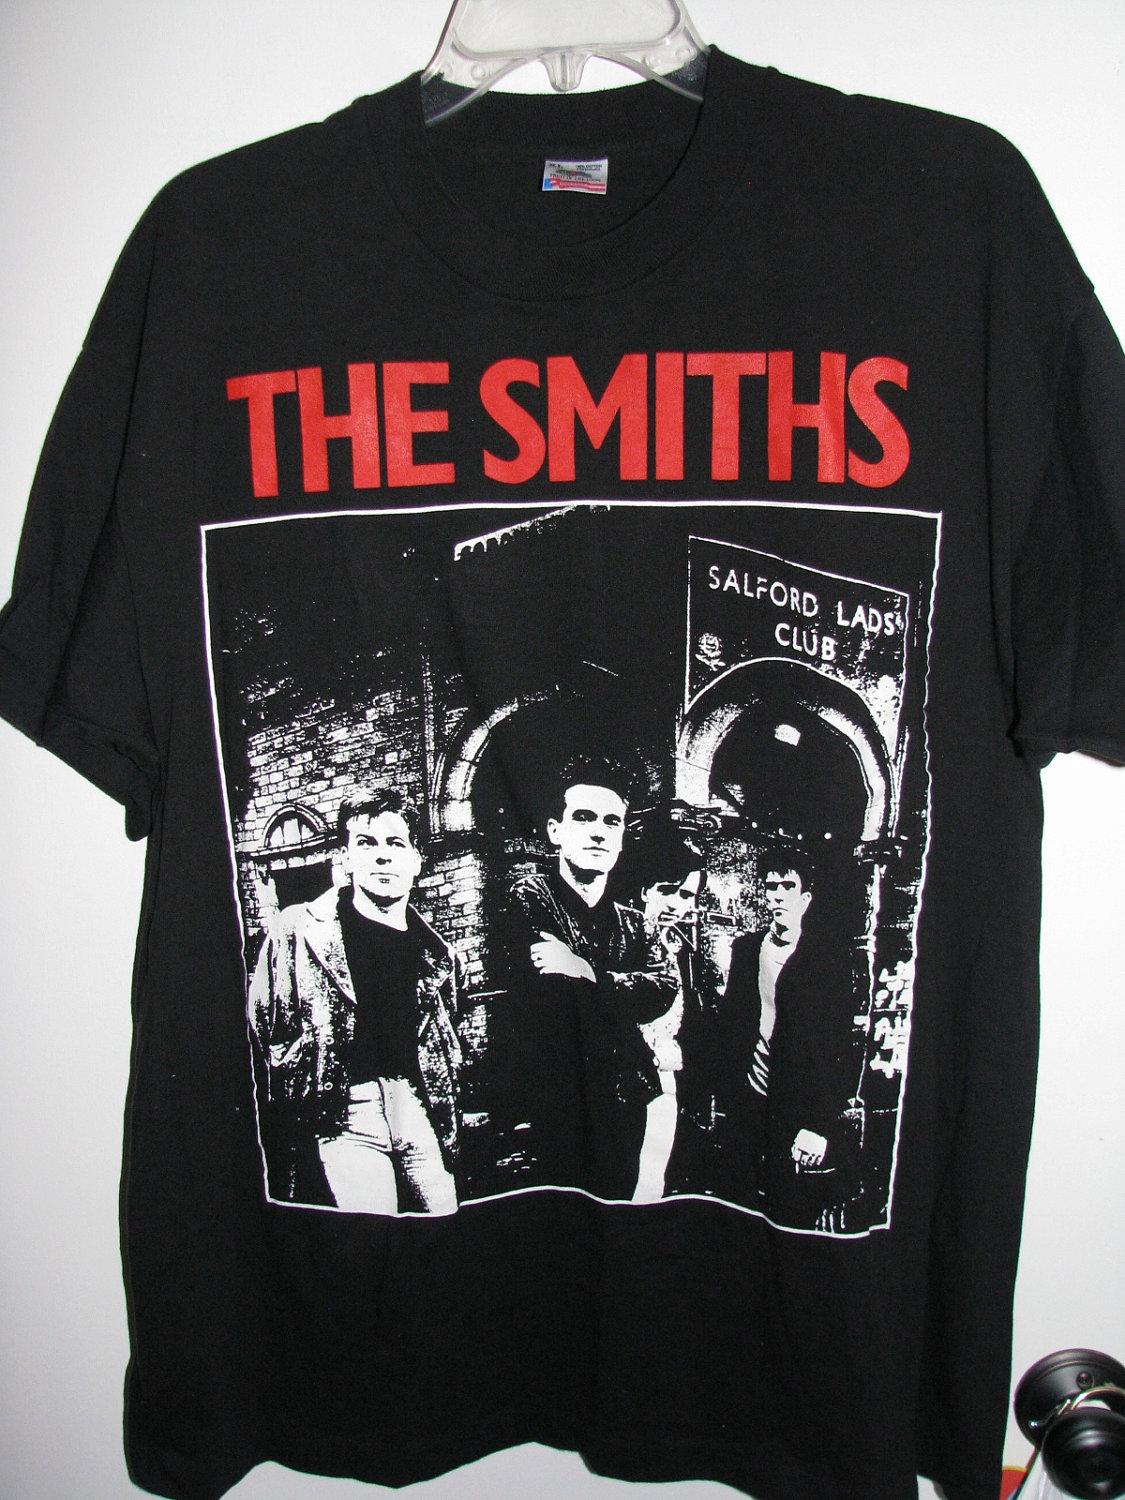 The Smiths Salford Lads Club Vintage '80s T-Shirt